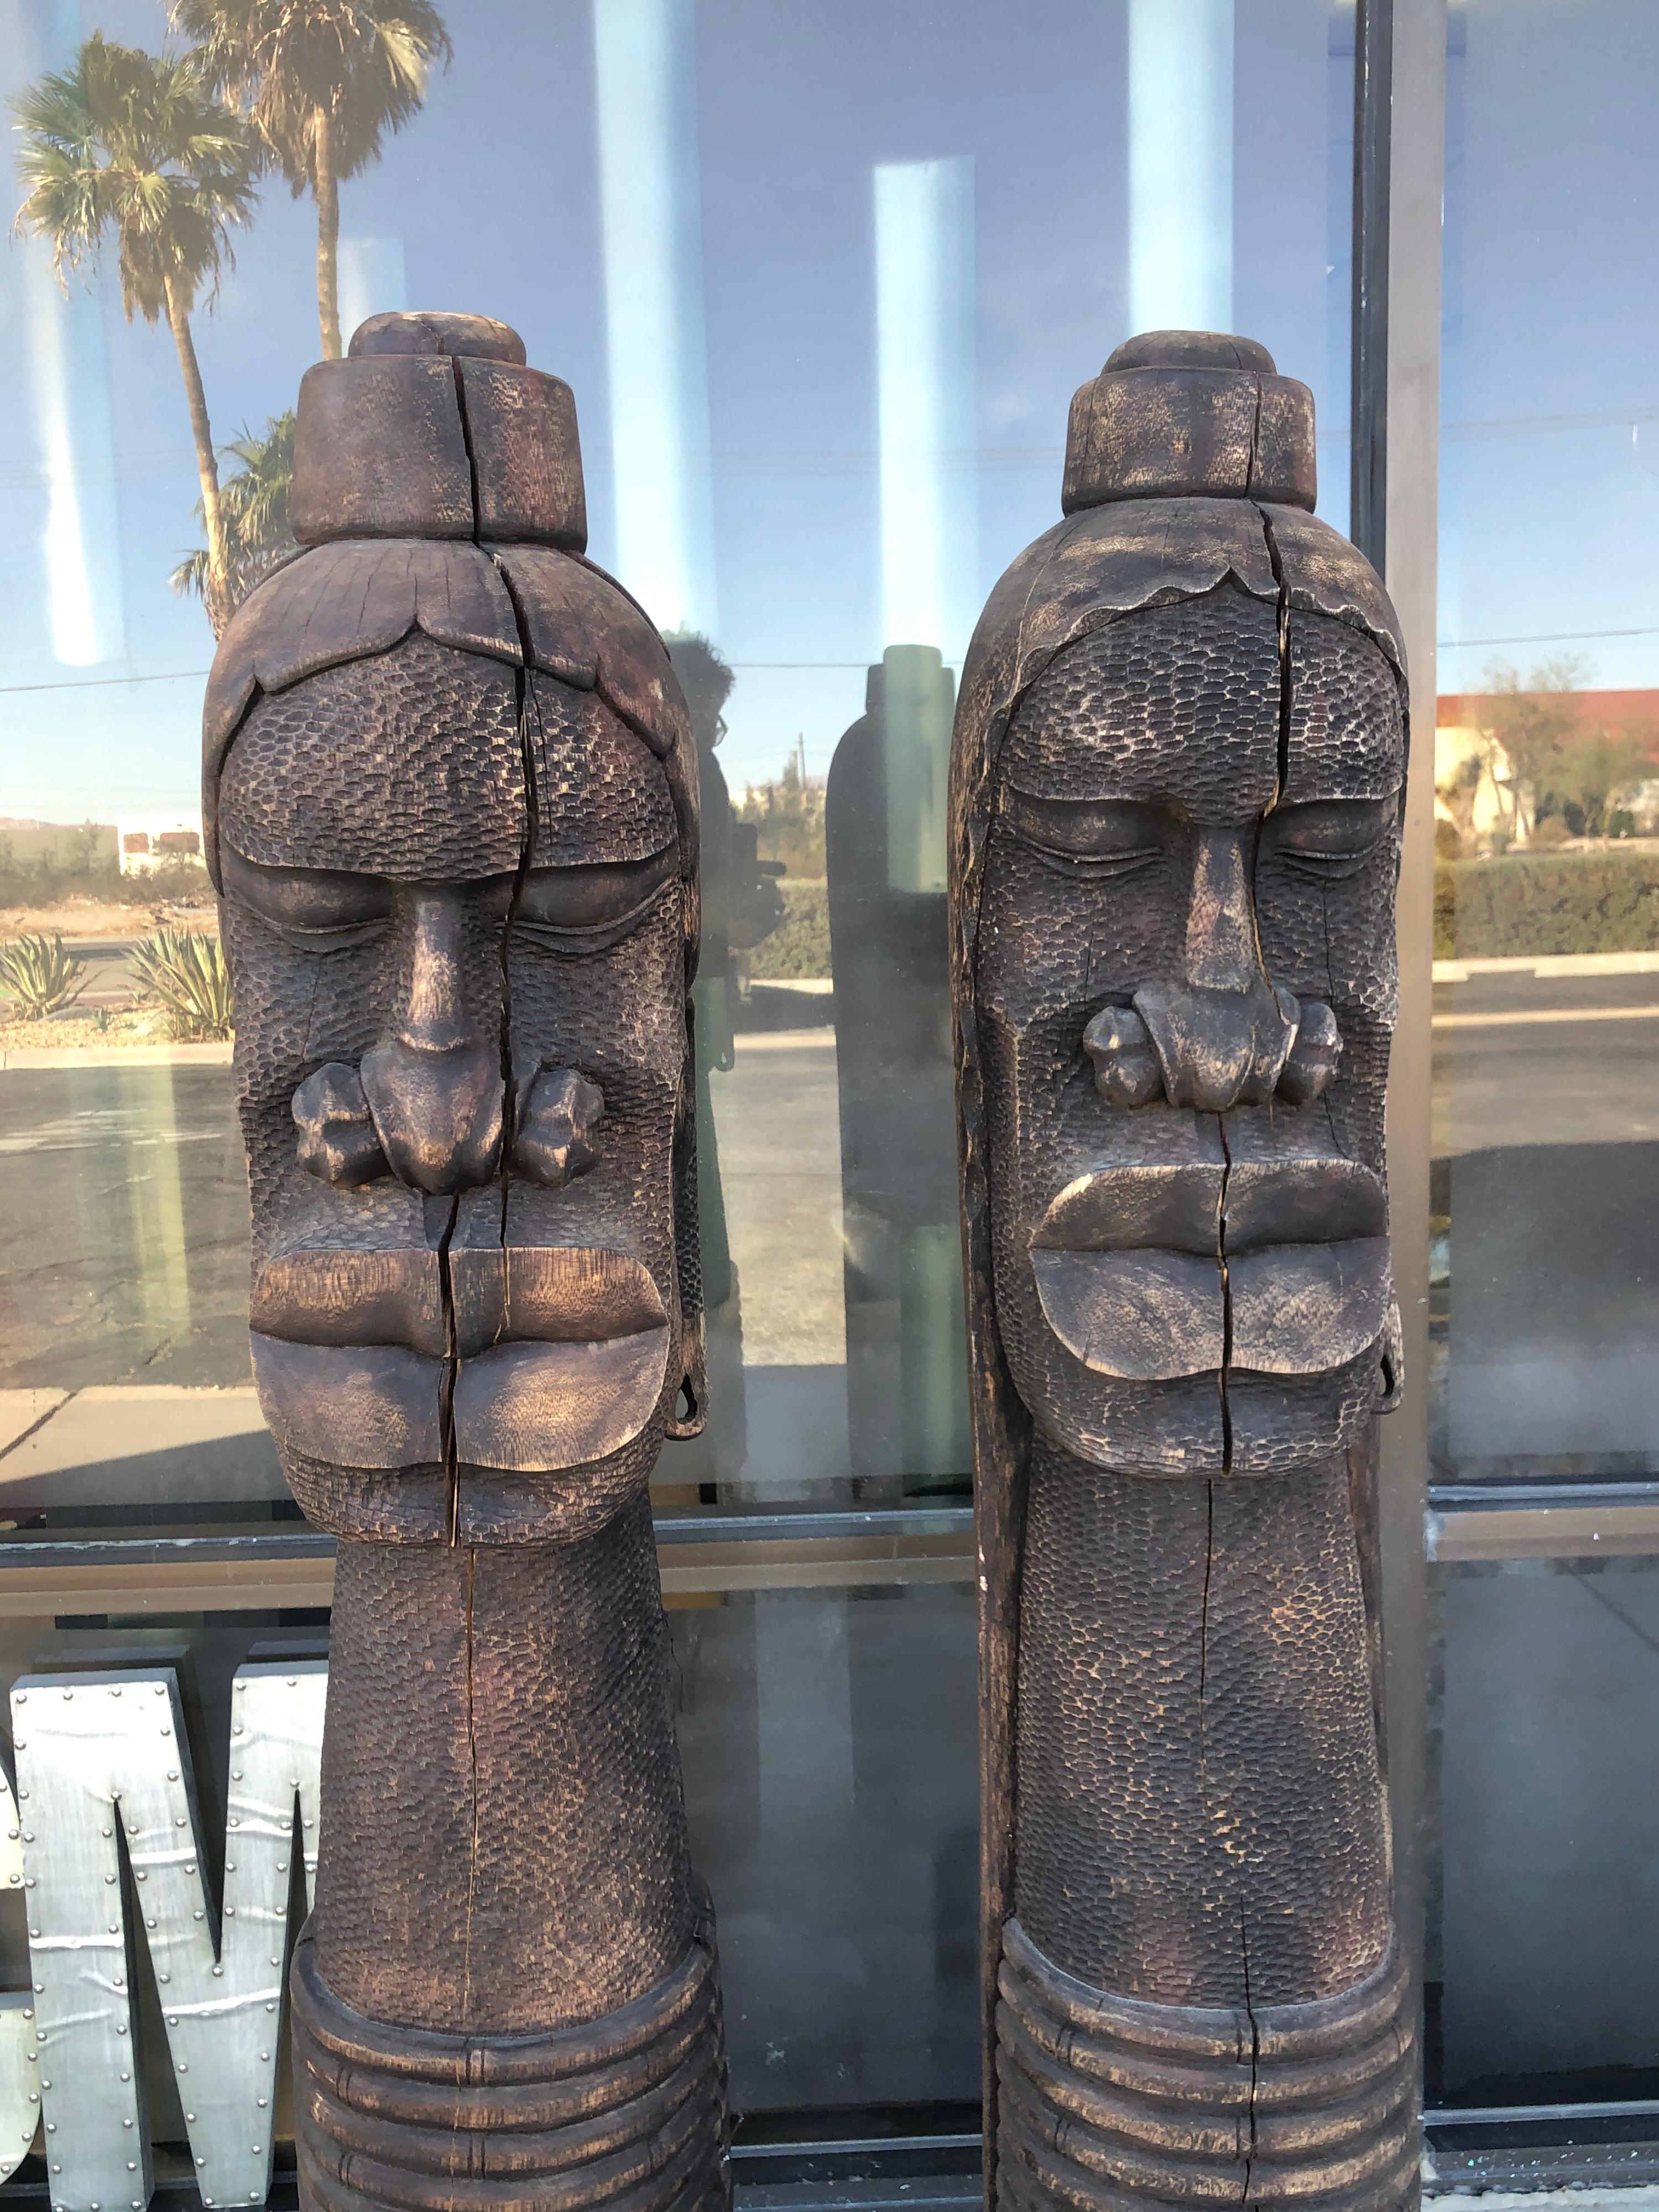 This statue was part of a collection that belonged to the late actor William Holden. He purchased all this African art for his beautiful estate in Palm Springs California.
This pair in particular is of a Masai tribe man and woman is from circa